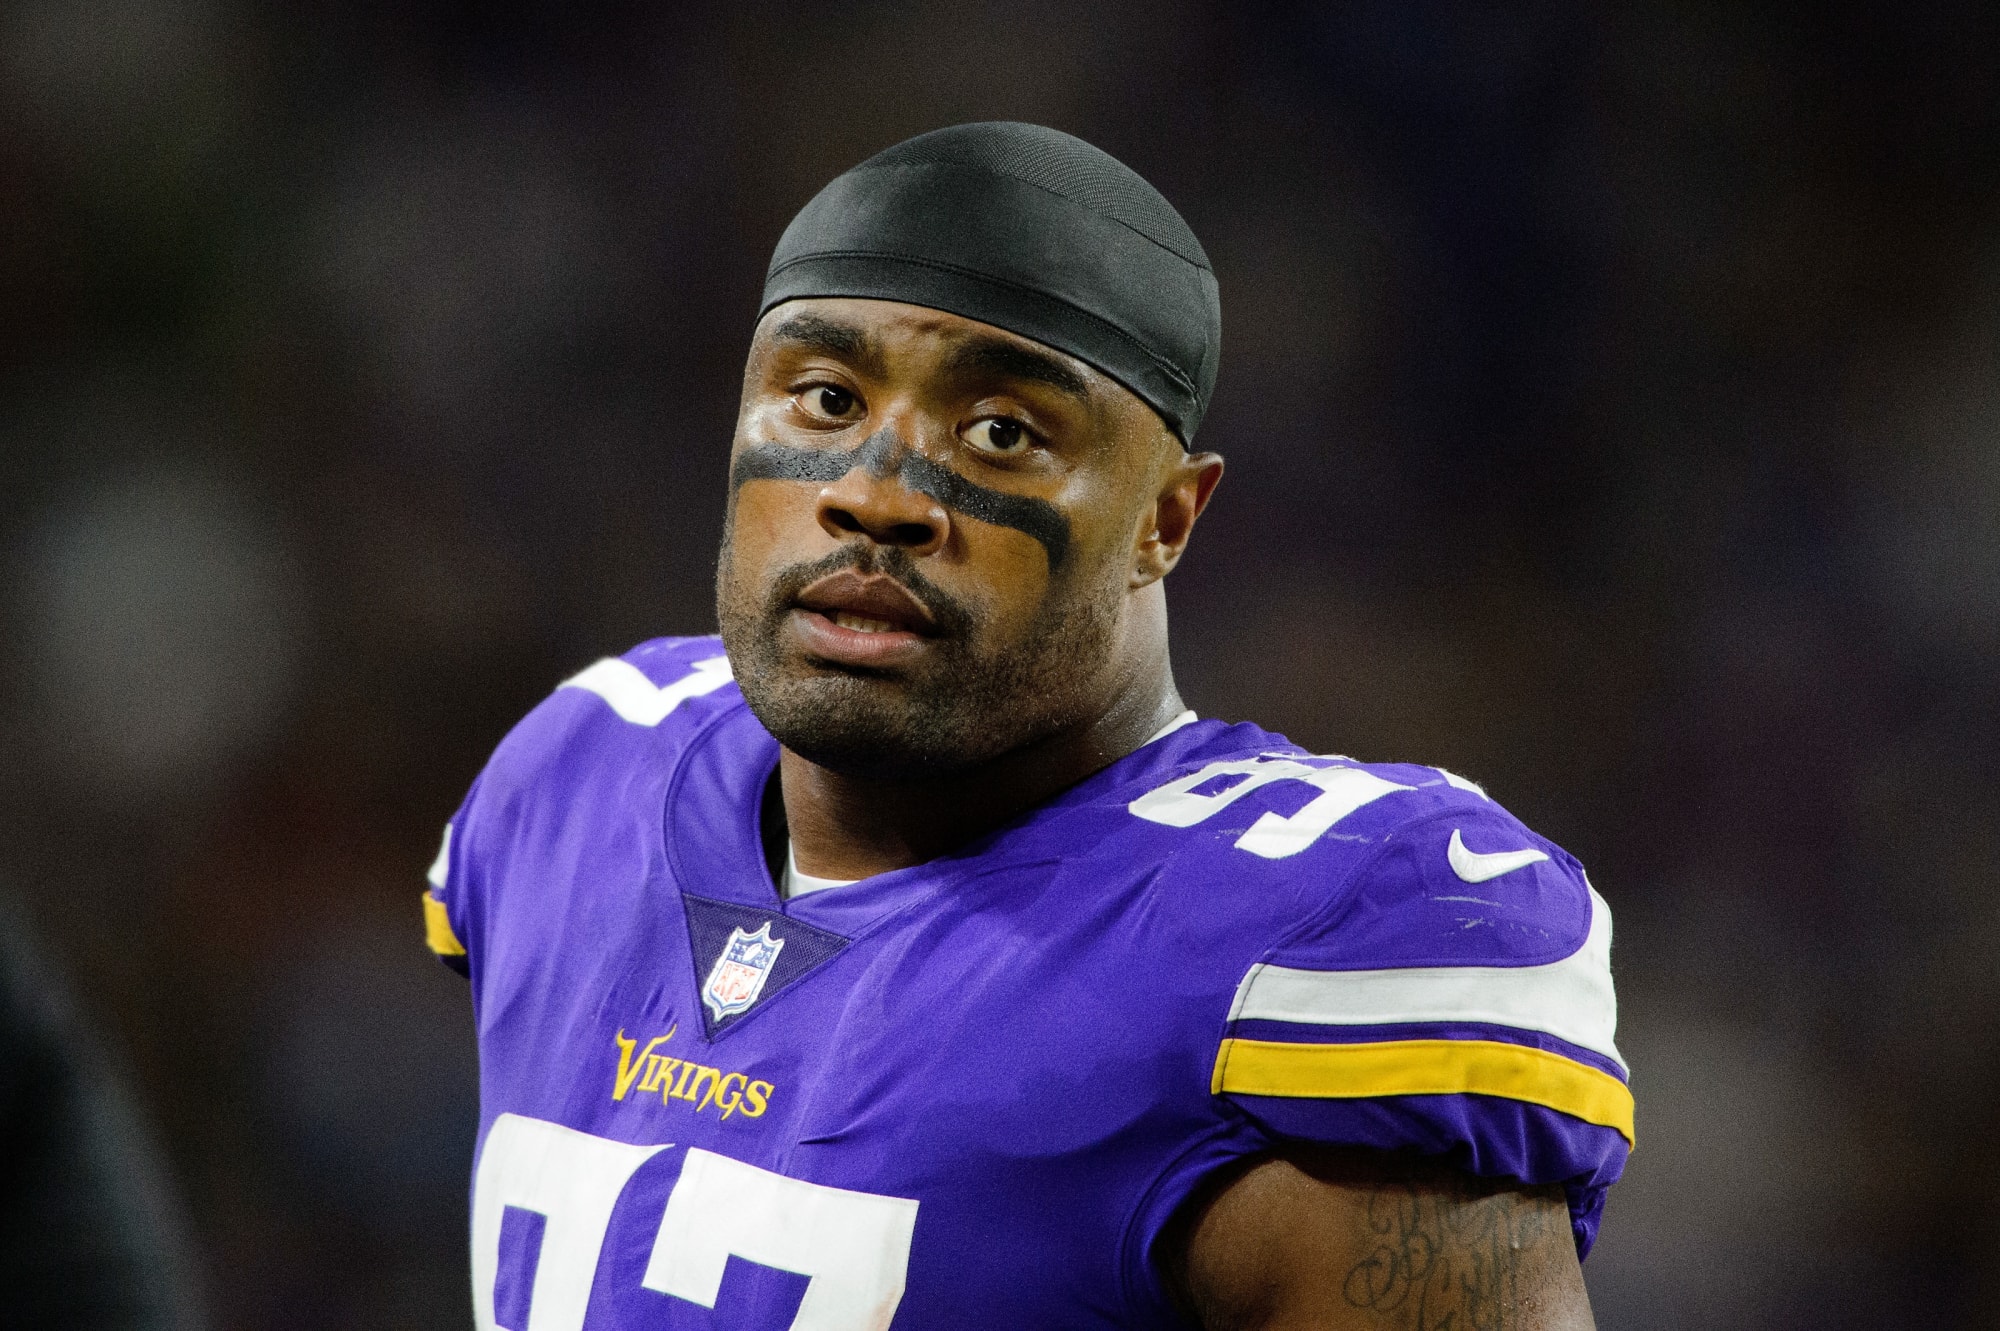 RUMOR: Everson Griffen’s Week 3 absence related to mental health